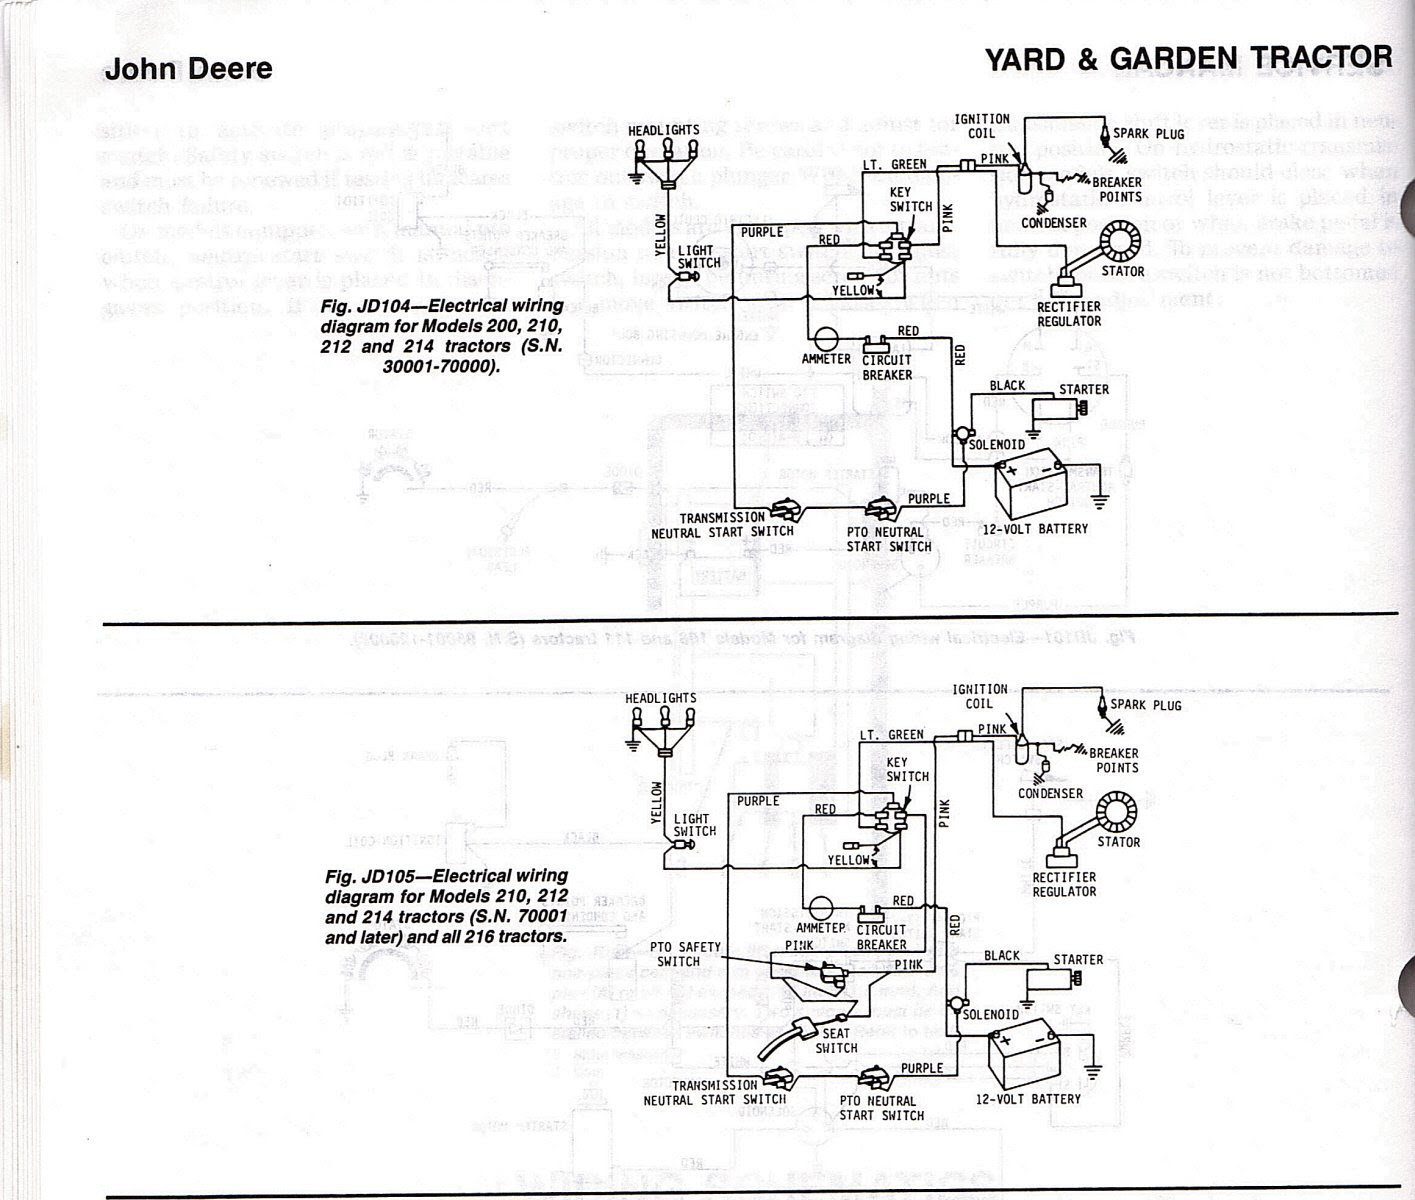 How can I see a wiring diagram for a deere model 212